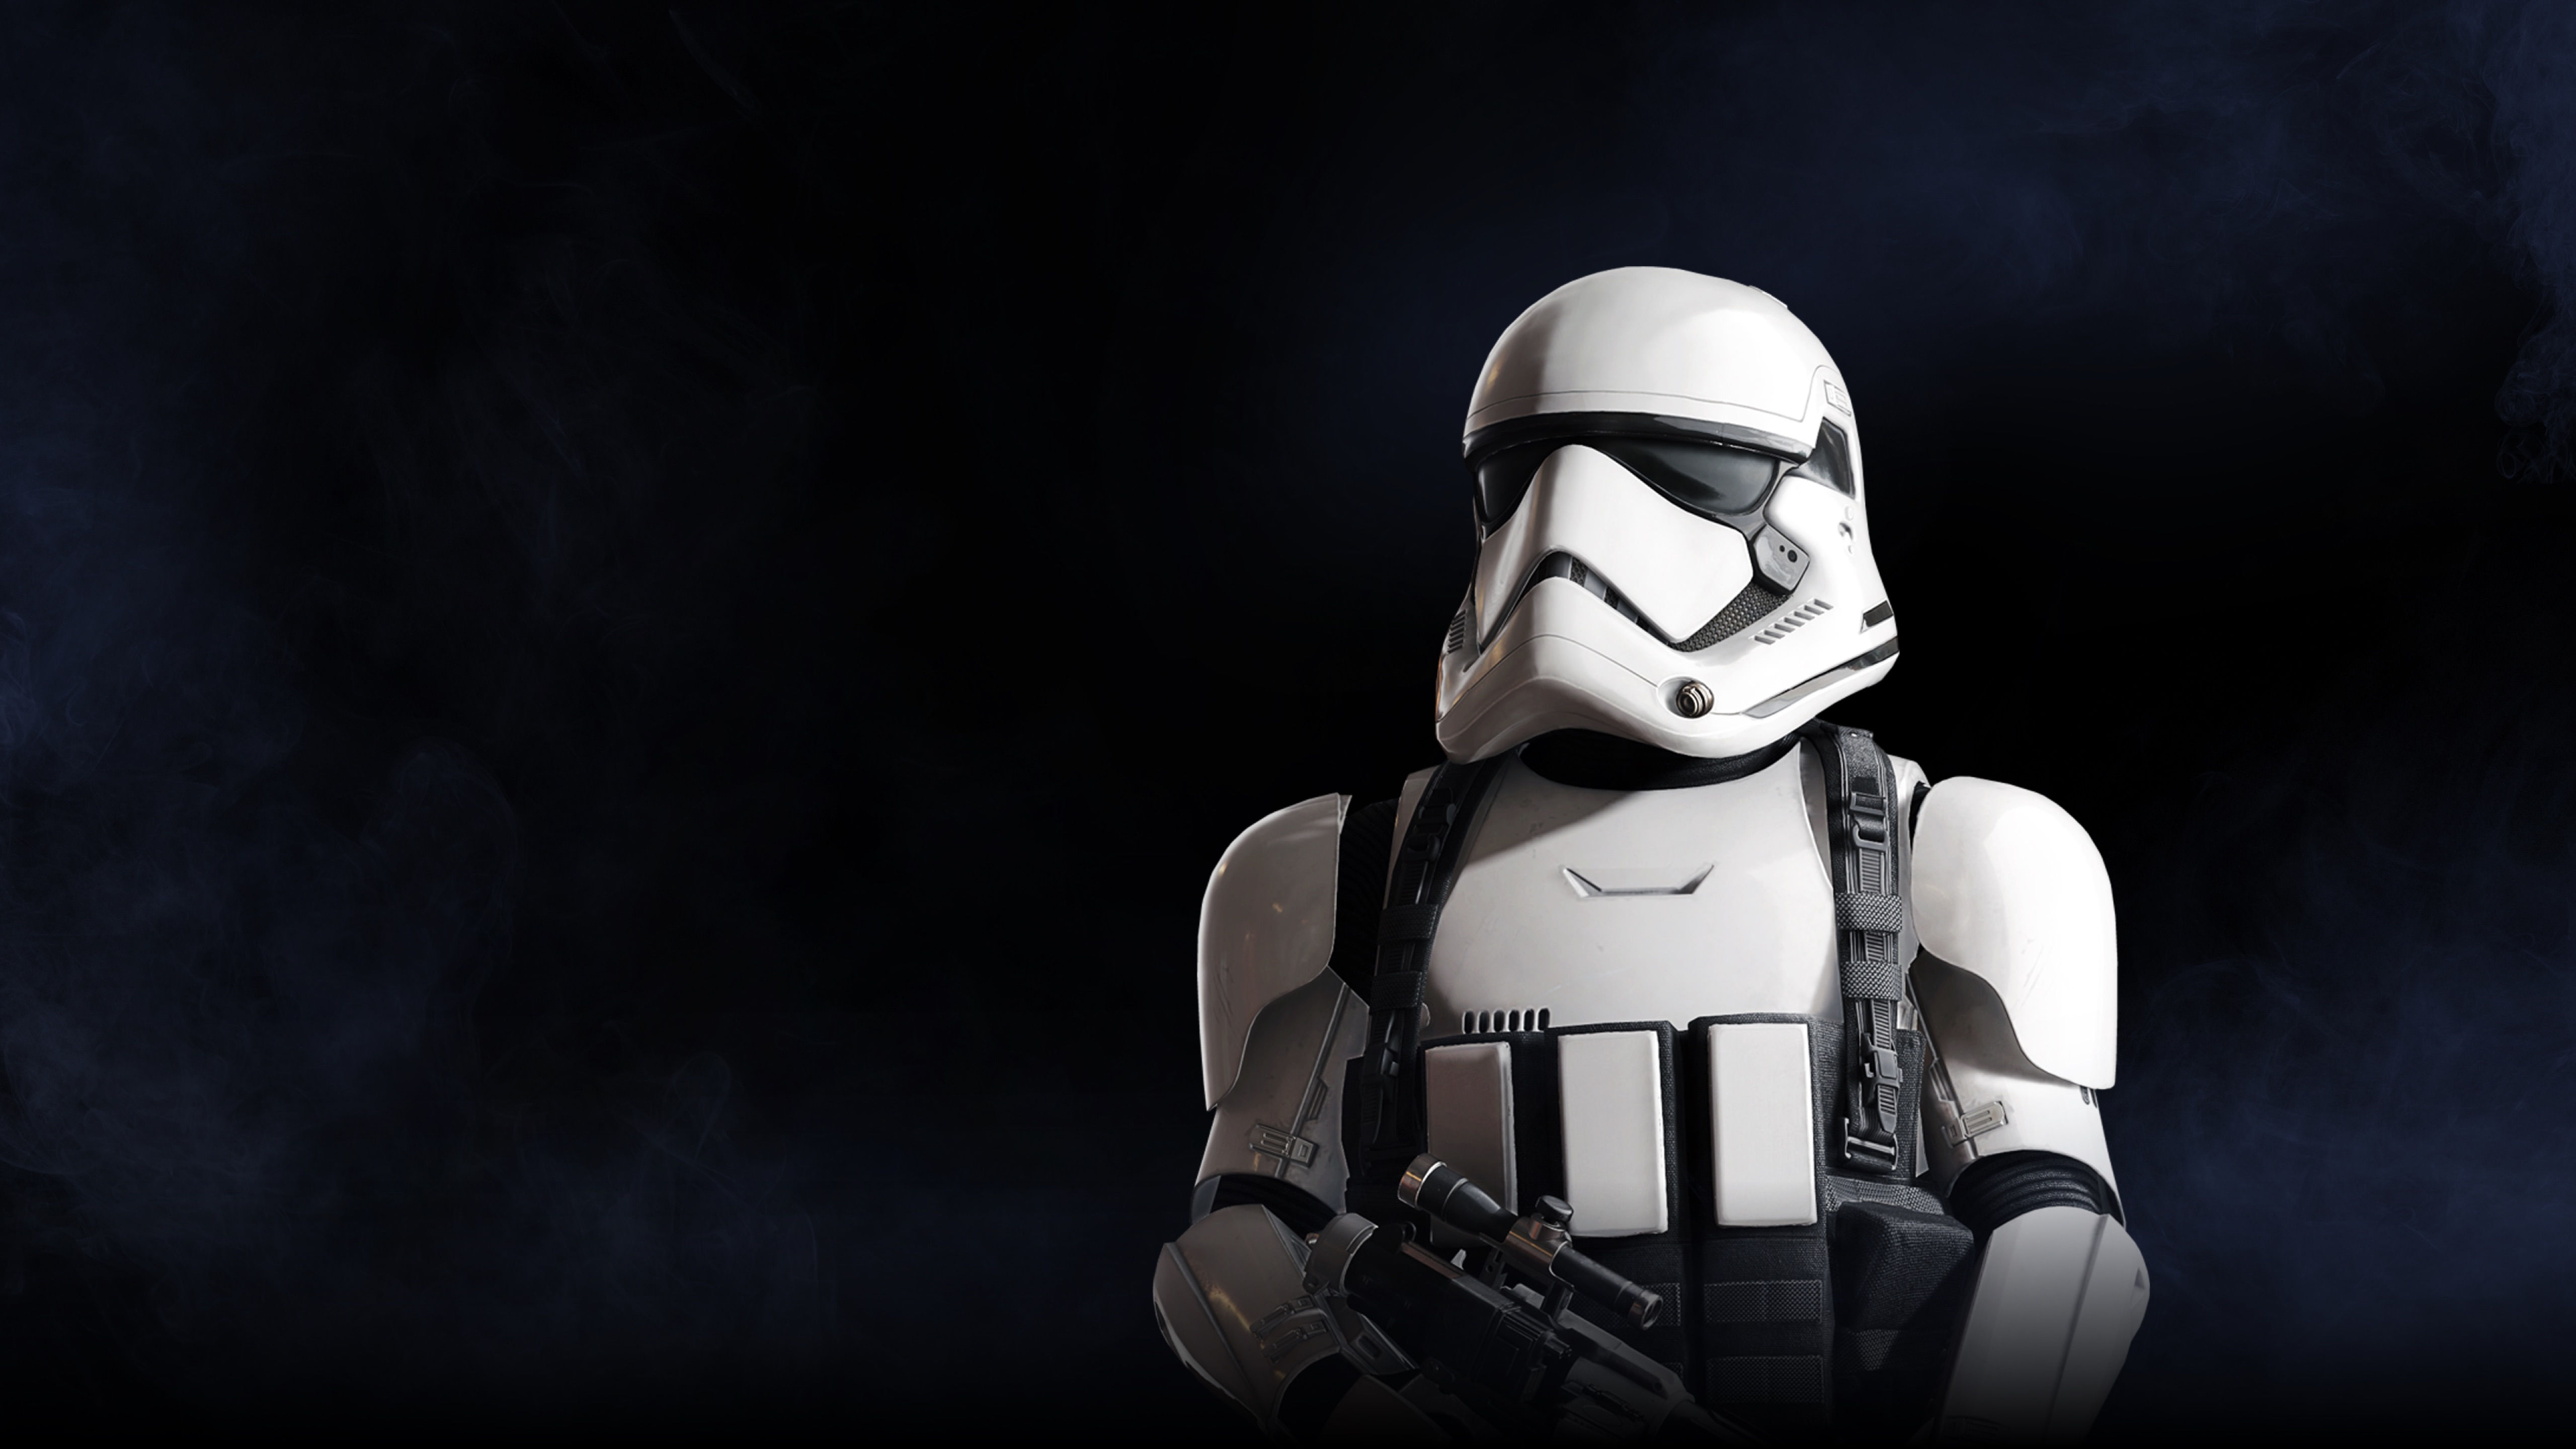 First Order Star Wars Galactic Empire Star Wars Star Wars Battlefront Star Wars Battlefront Ii 2017  5120x2880